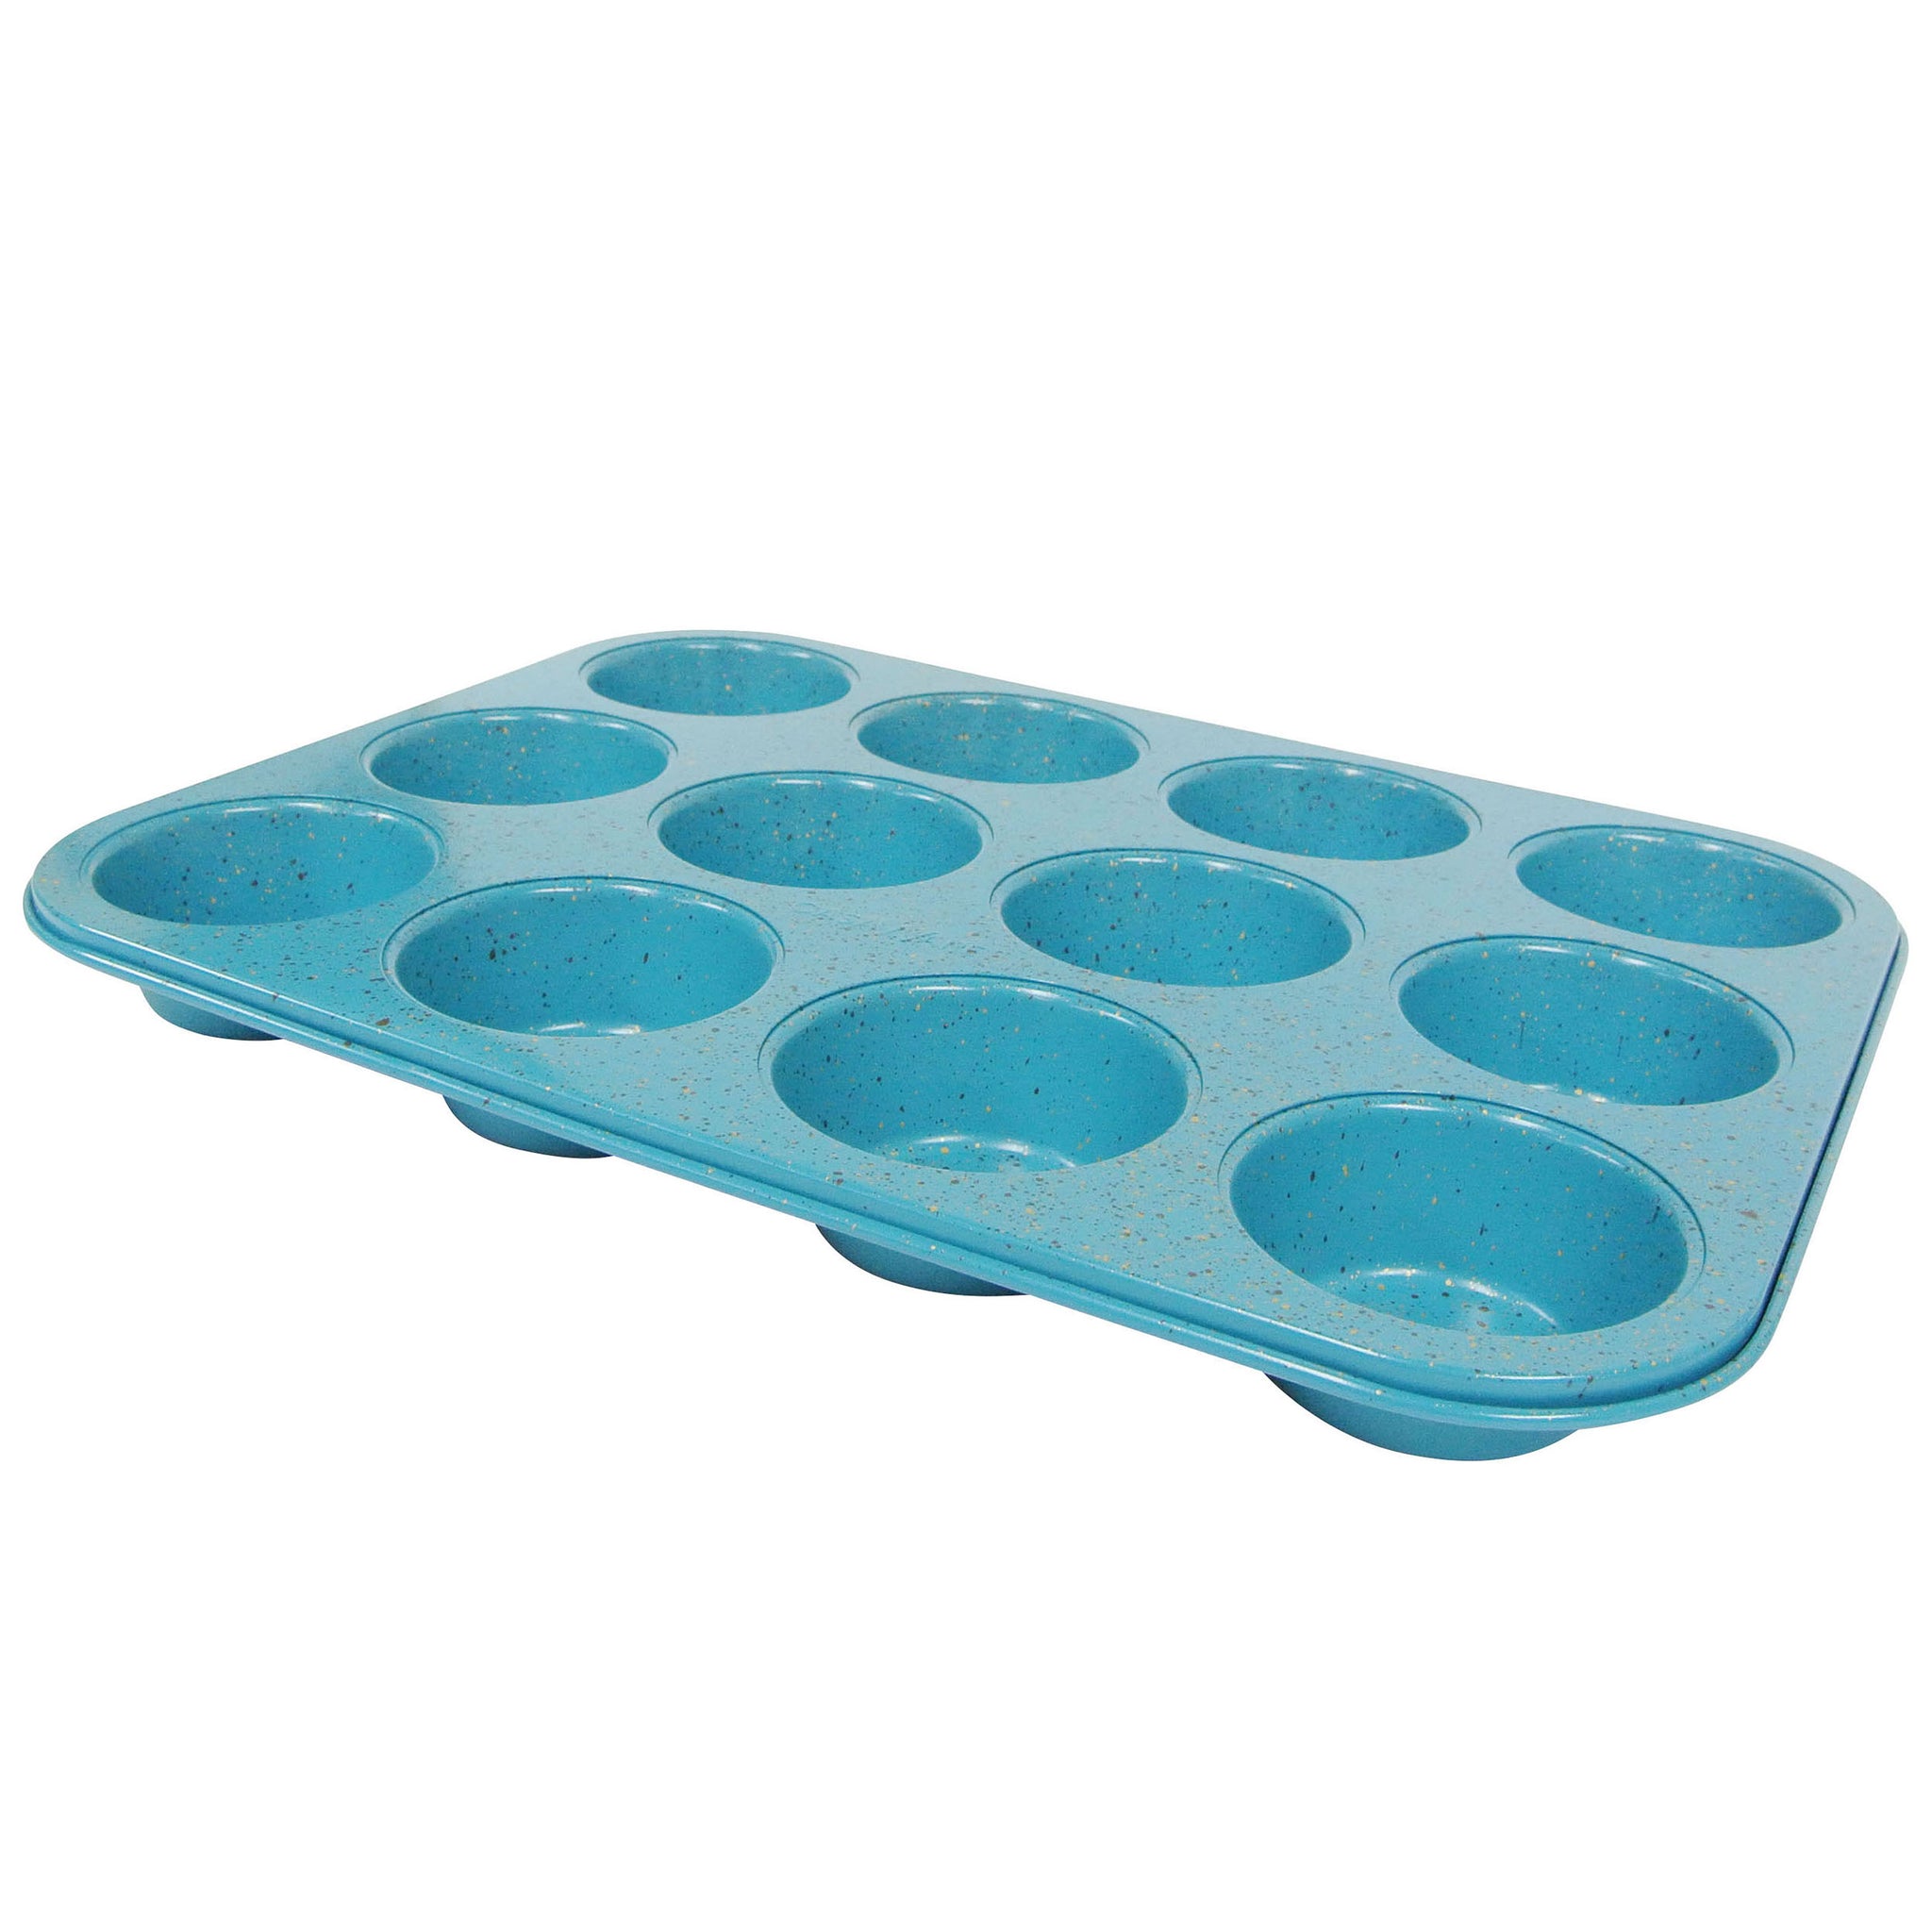 Nutrichef 24 Cup Muffin Pan Blue - Blue